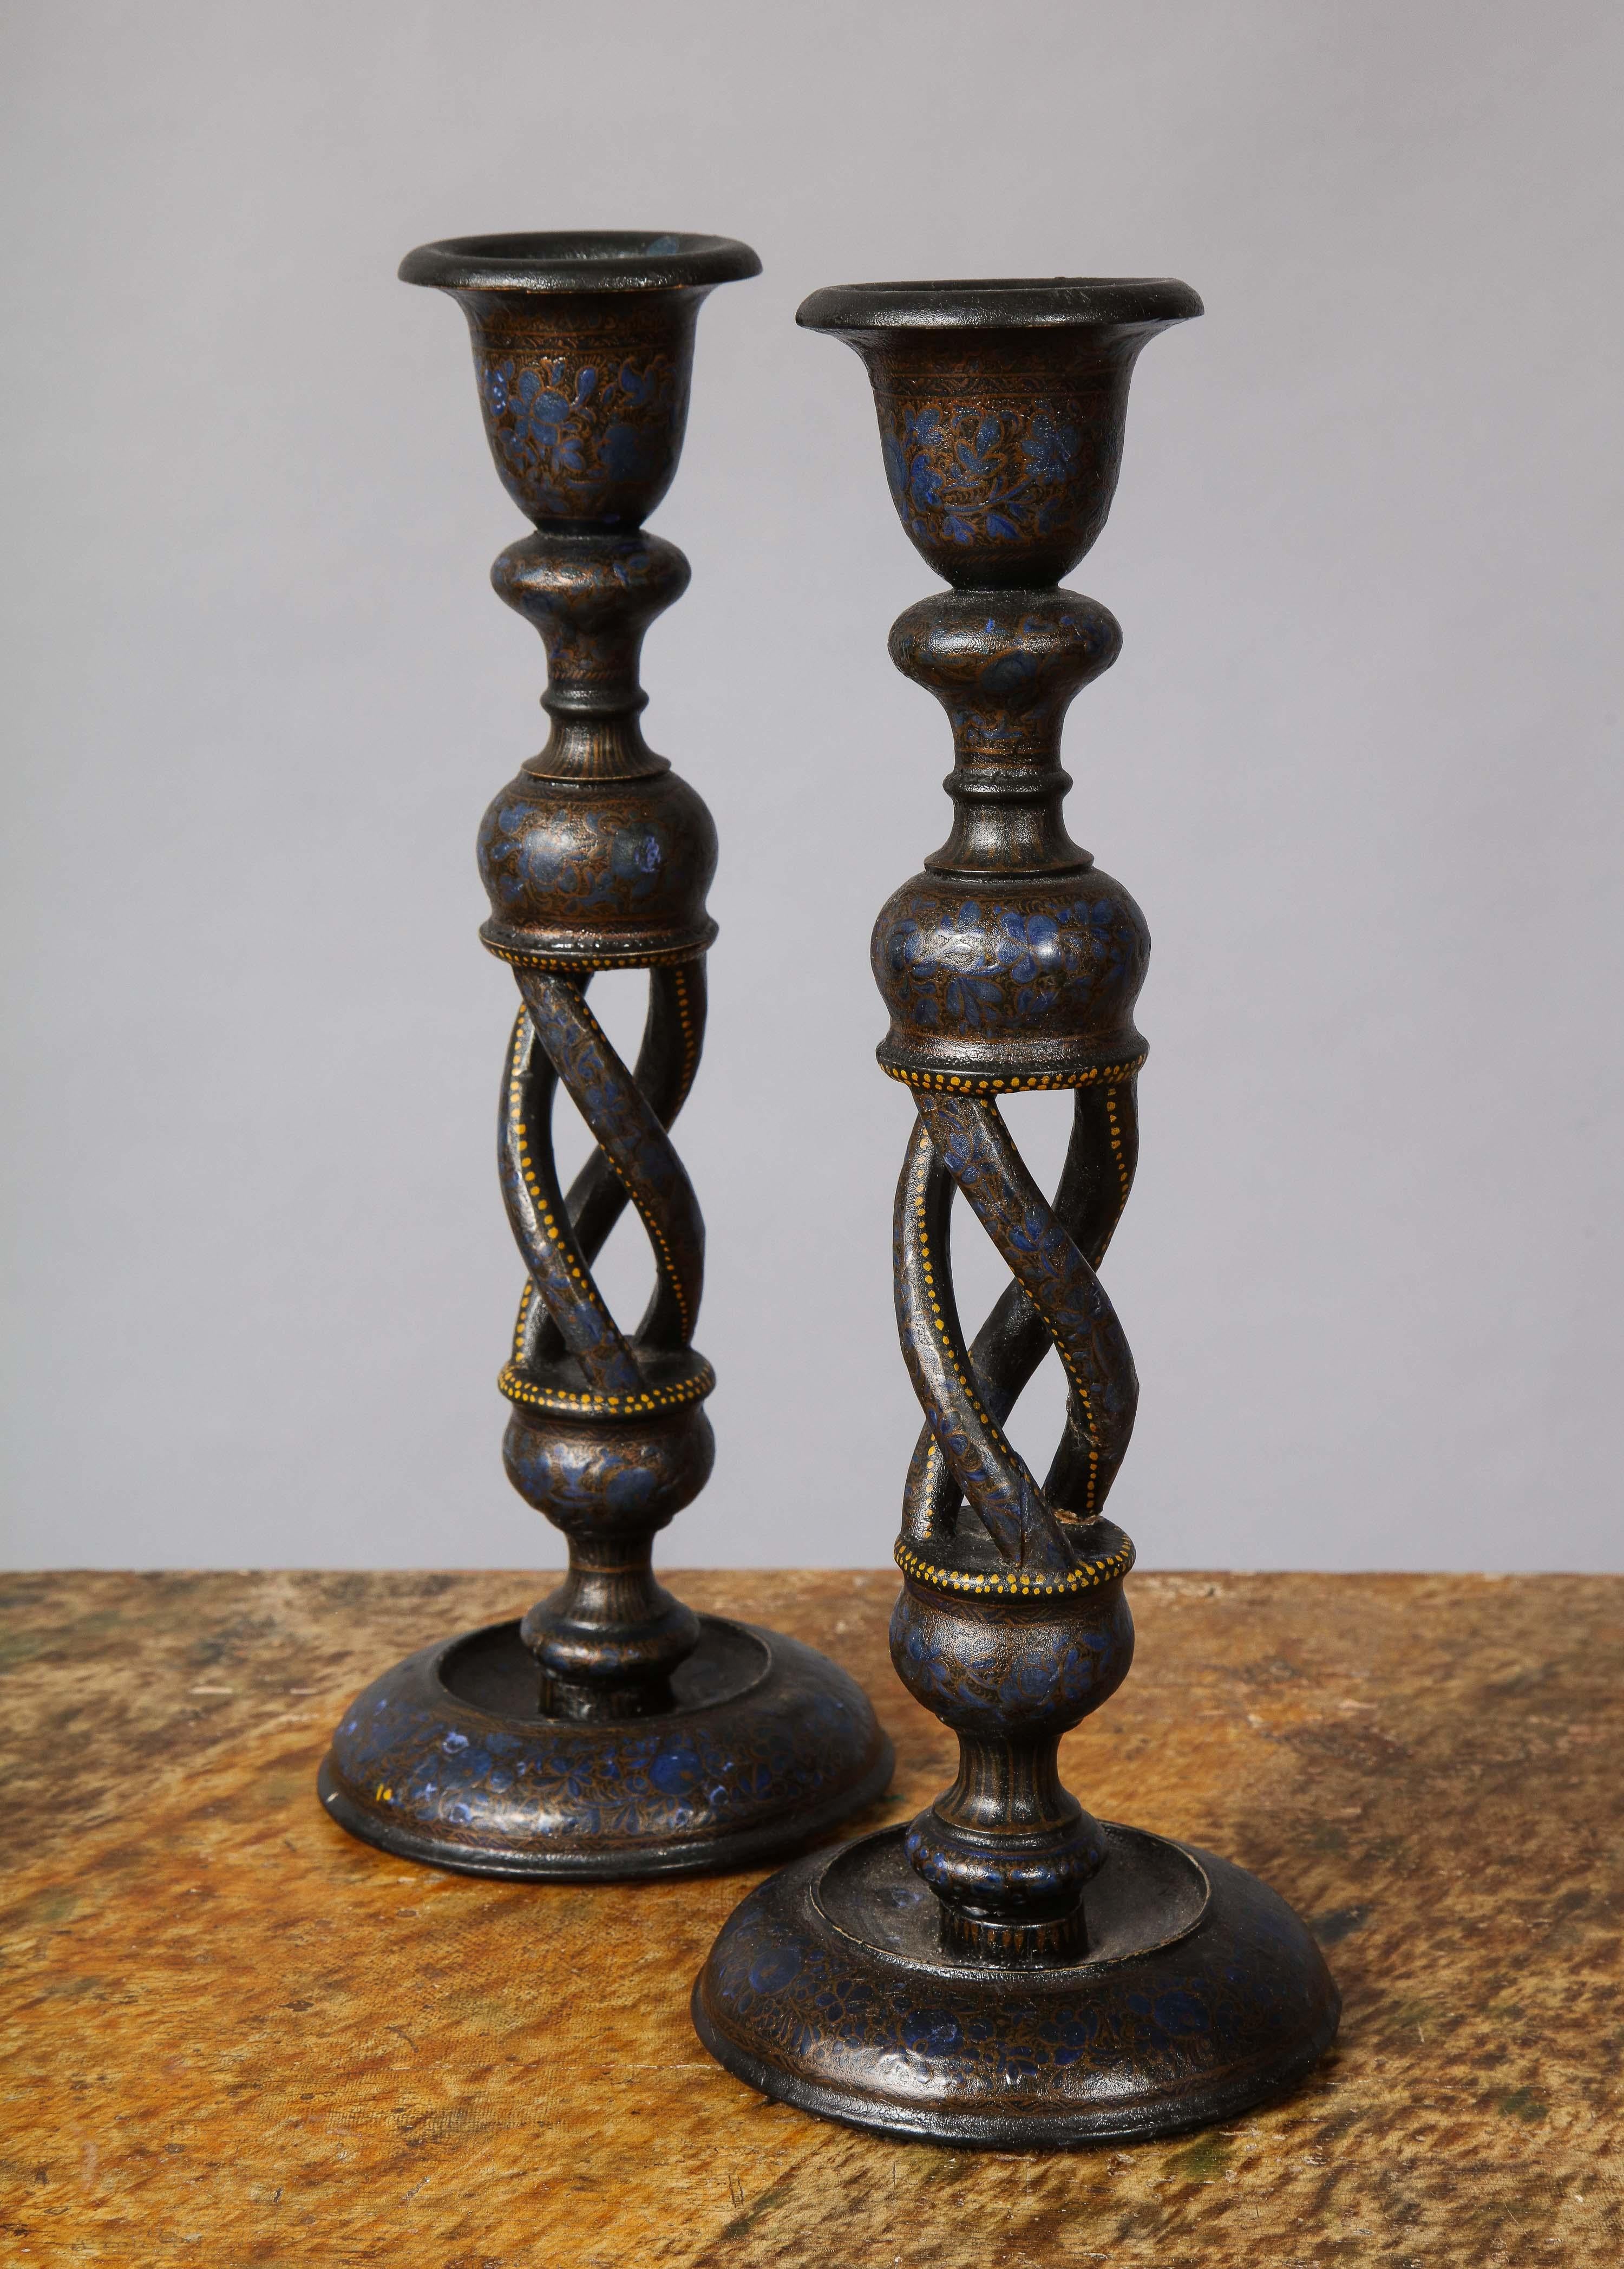 Fine pair of 19th century paint decorated barley twist candlesticks from Kashmir, circa 1880, retaining original decoration and nice old finish, easily adapted for electrification if so desired.